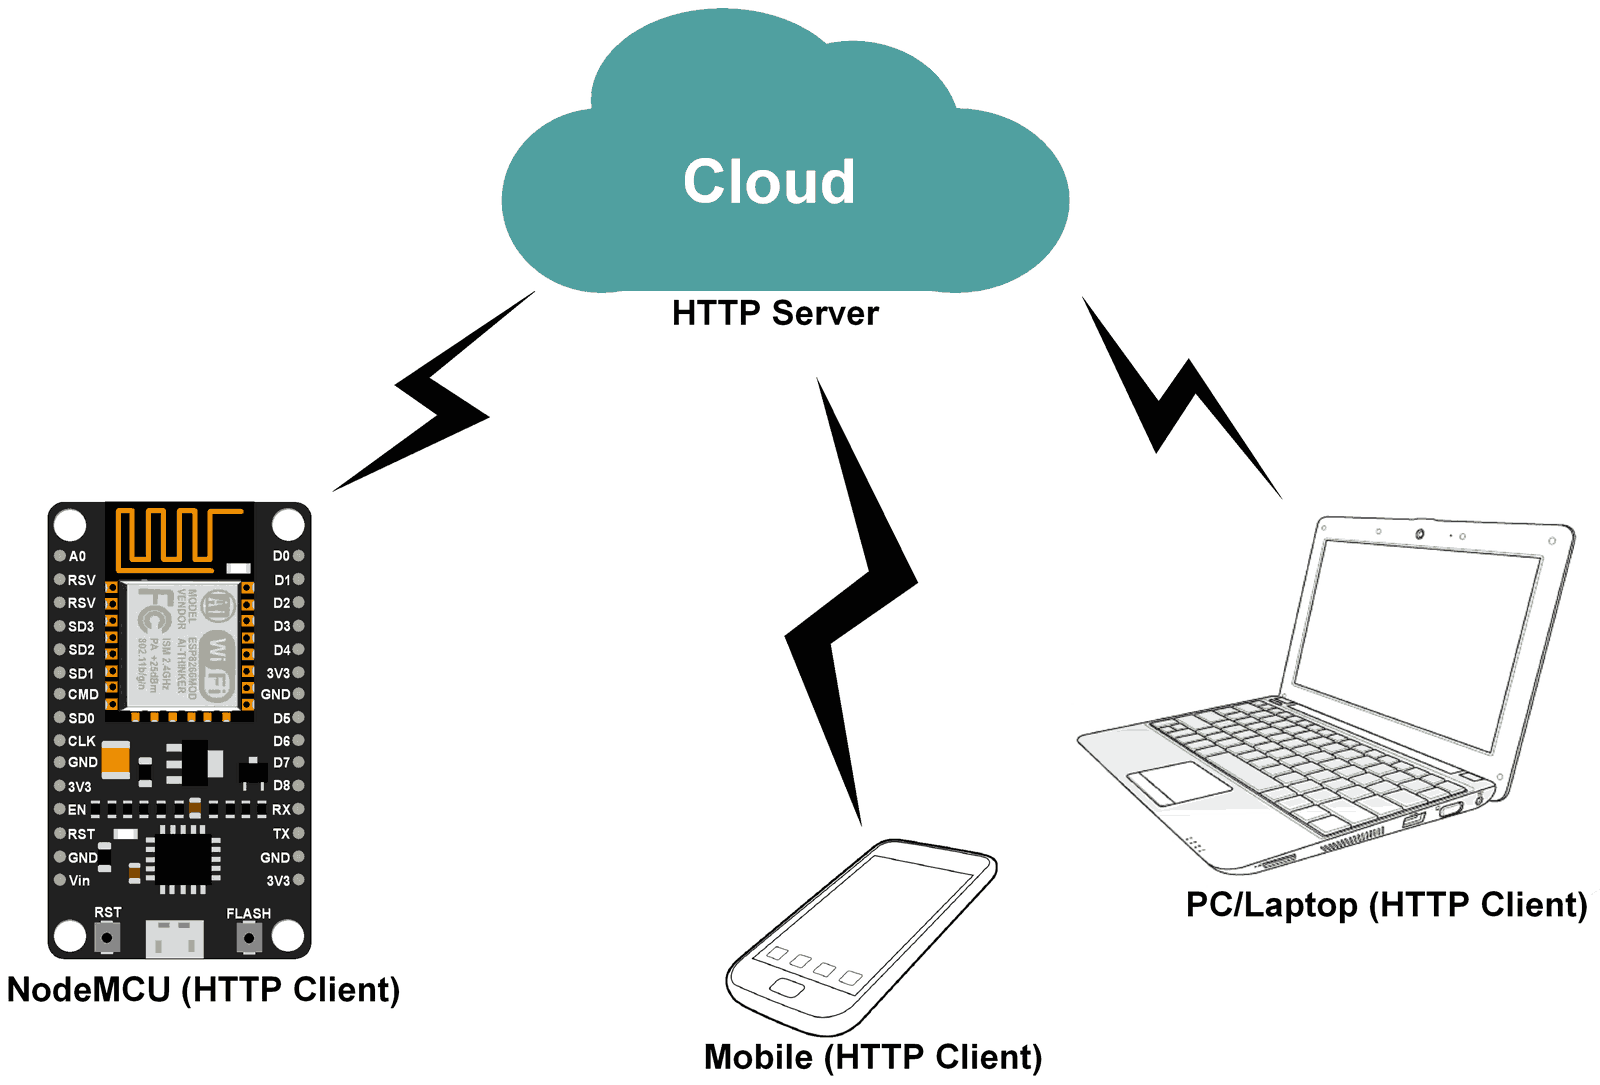 This Diagram shows how HTTP Server Works